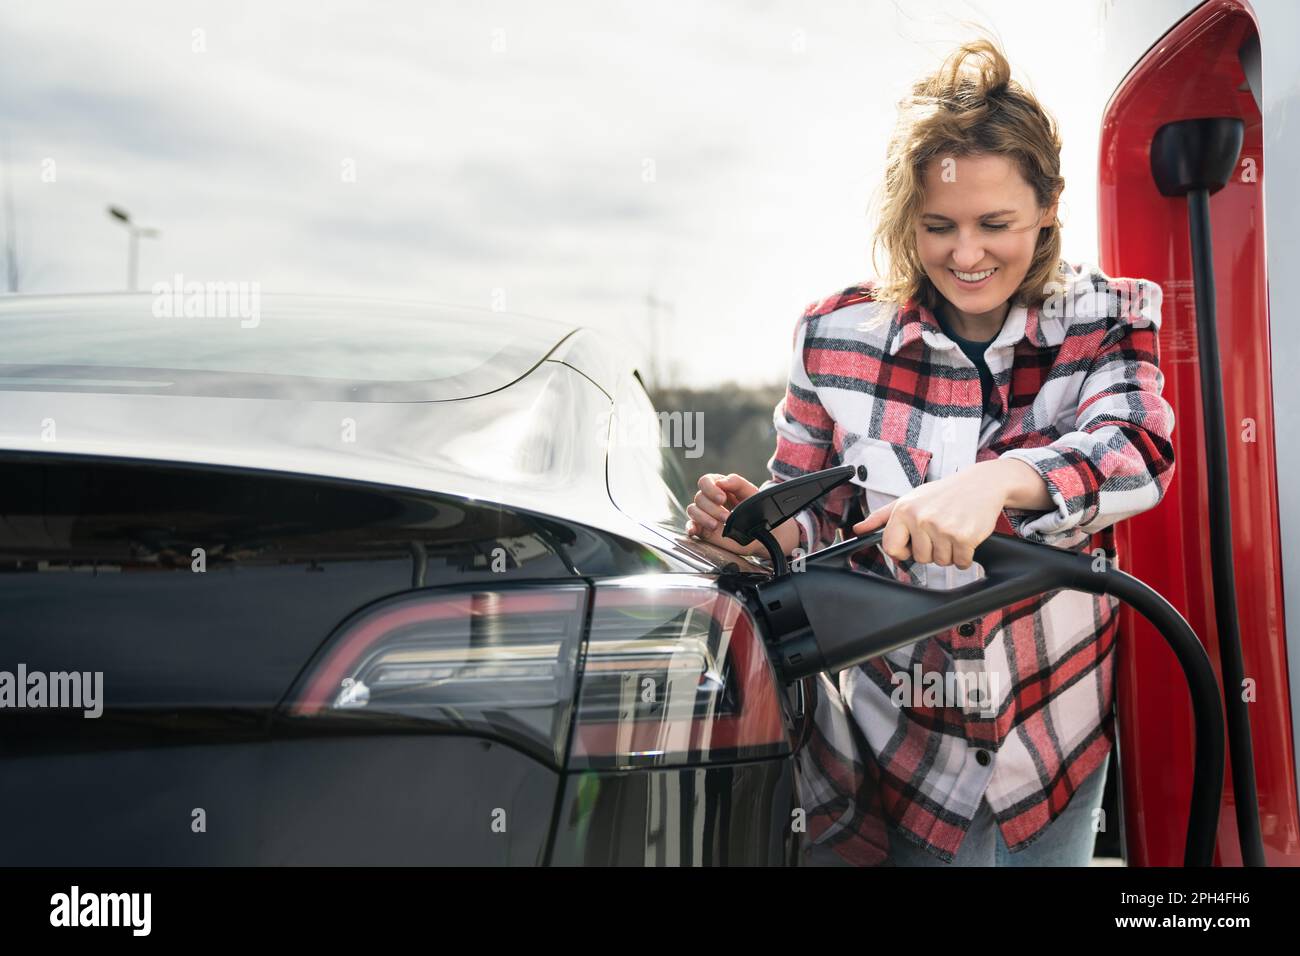 Woman in a plaid shirt charging an electric car. Stock Photo